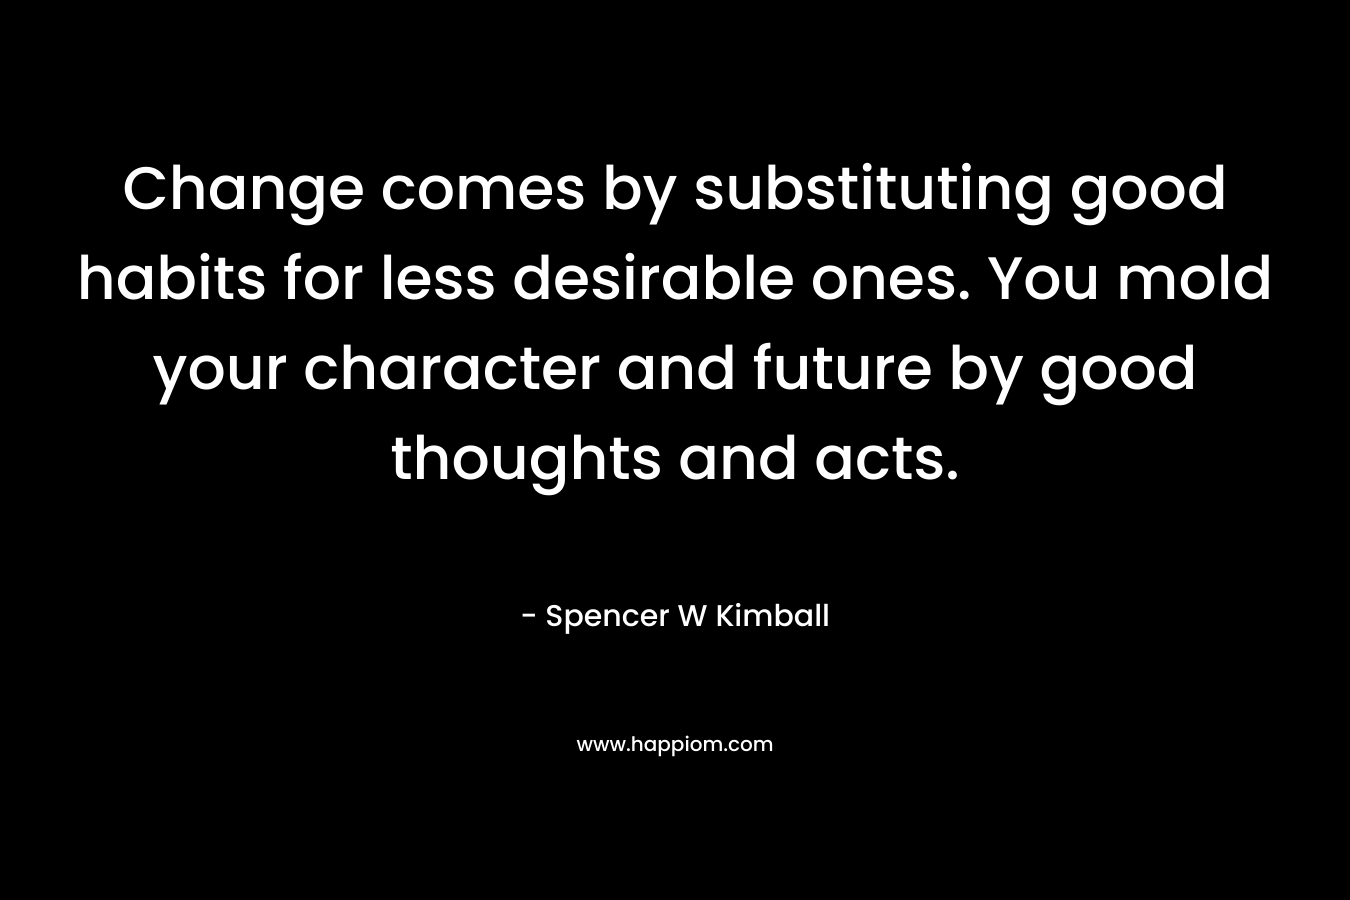 Change comes by substituting good habits for less desirable ones. You mold your character and future by good thoughts and acts. – Spencer W Kimball